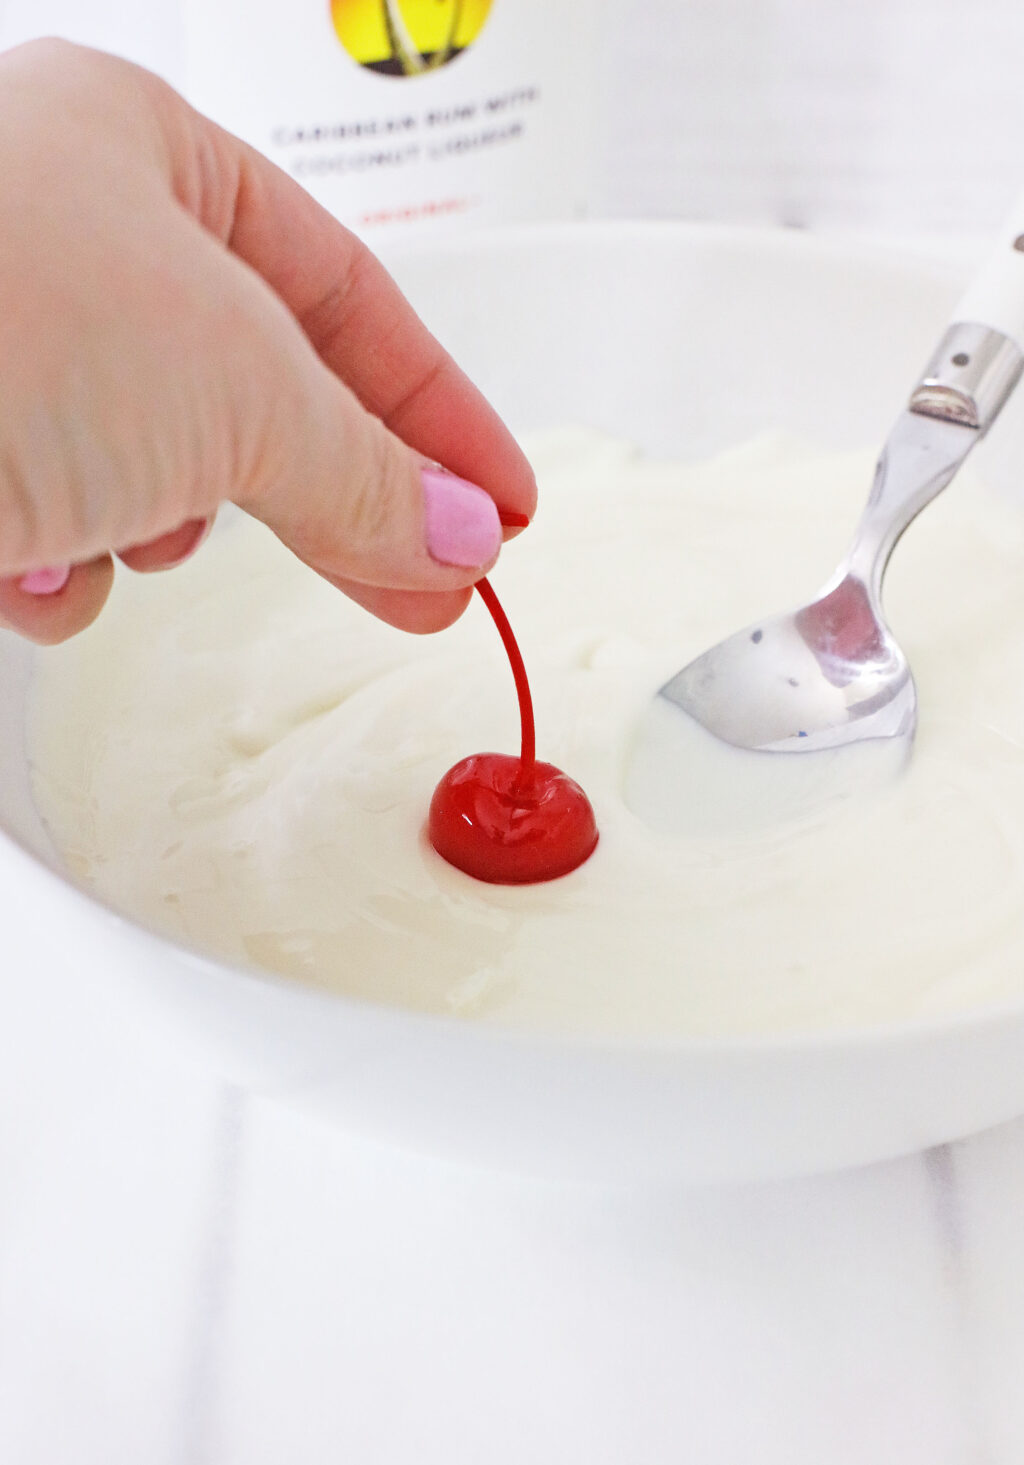 woman's hand dipping red cherry into white melted chocolate